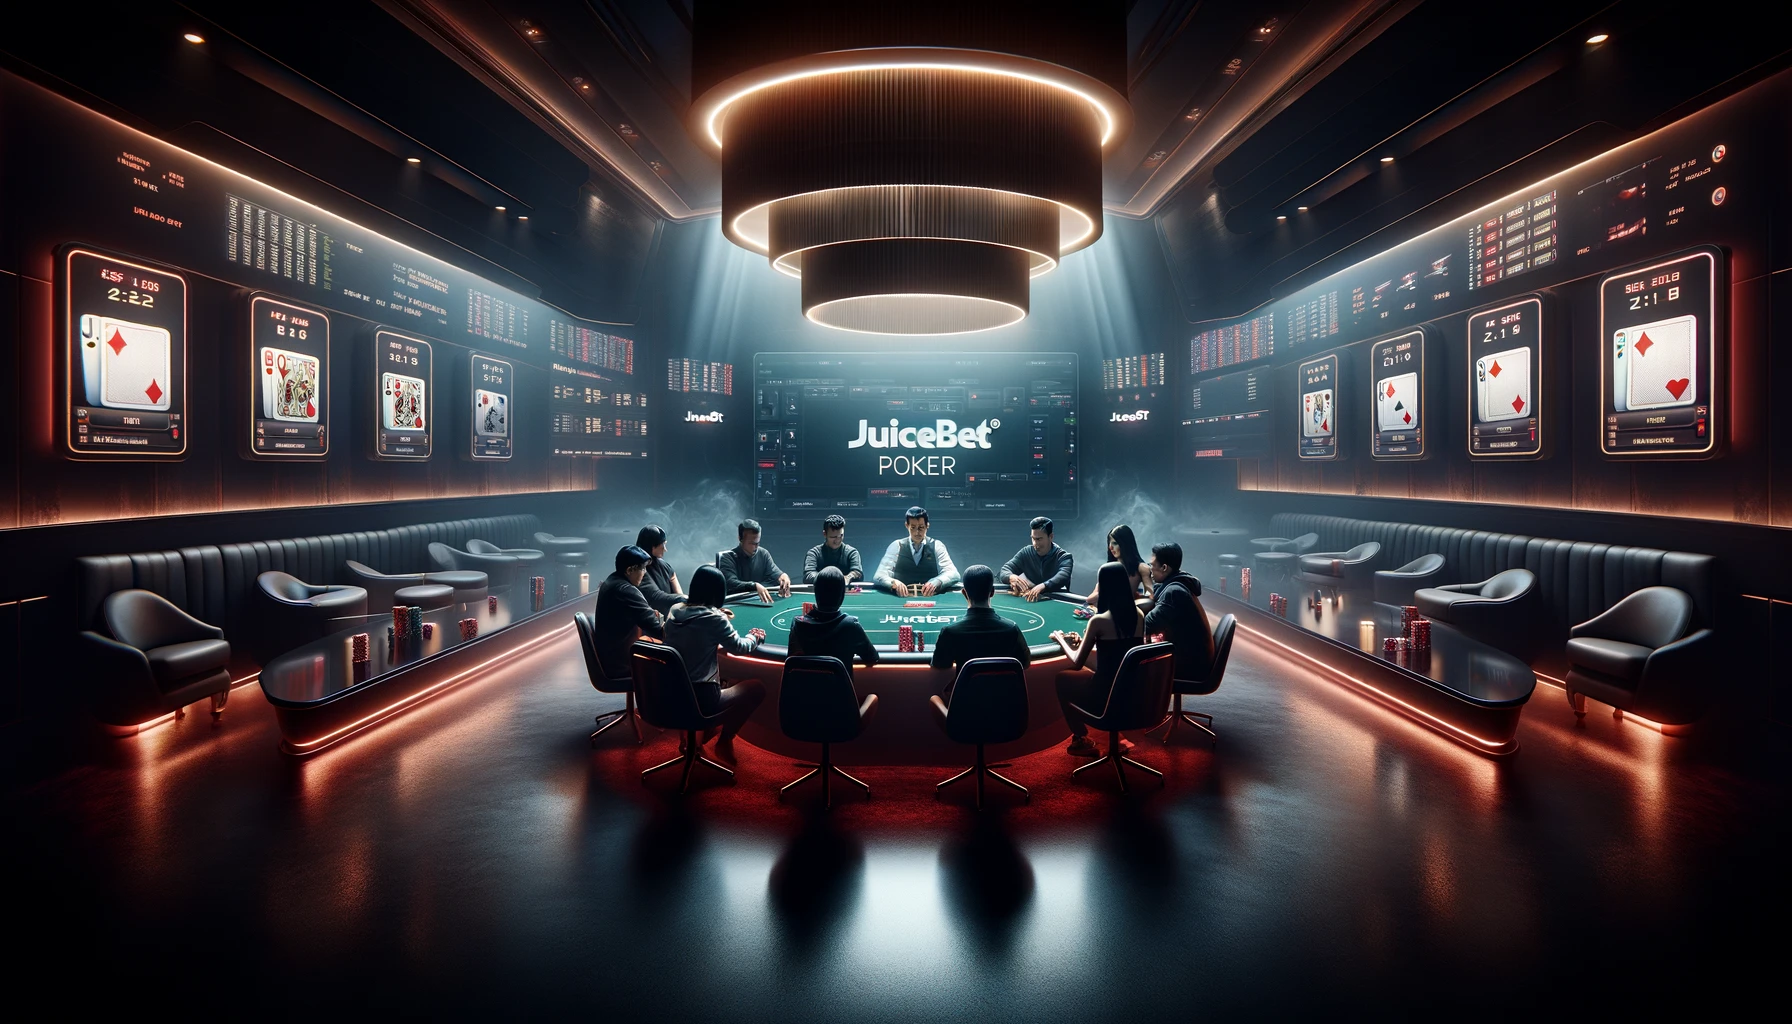 Introduction to the world of poker at Juicebet 2